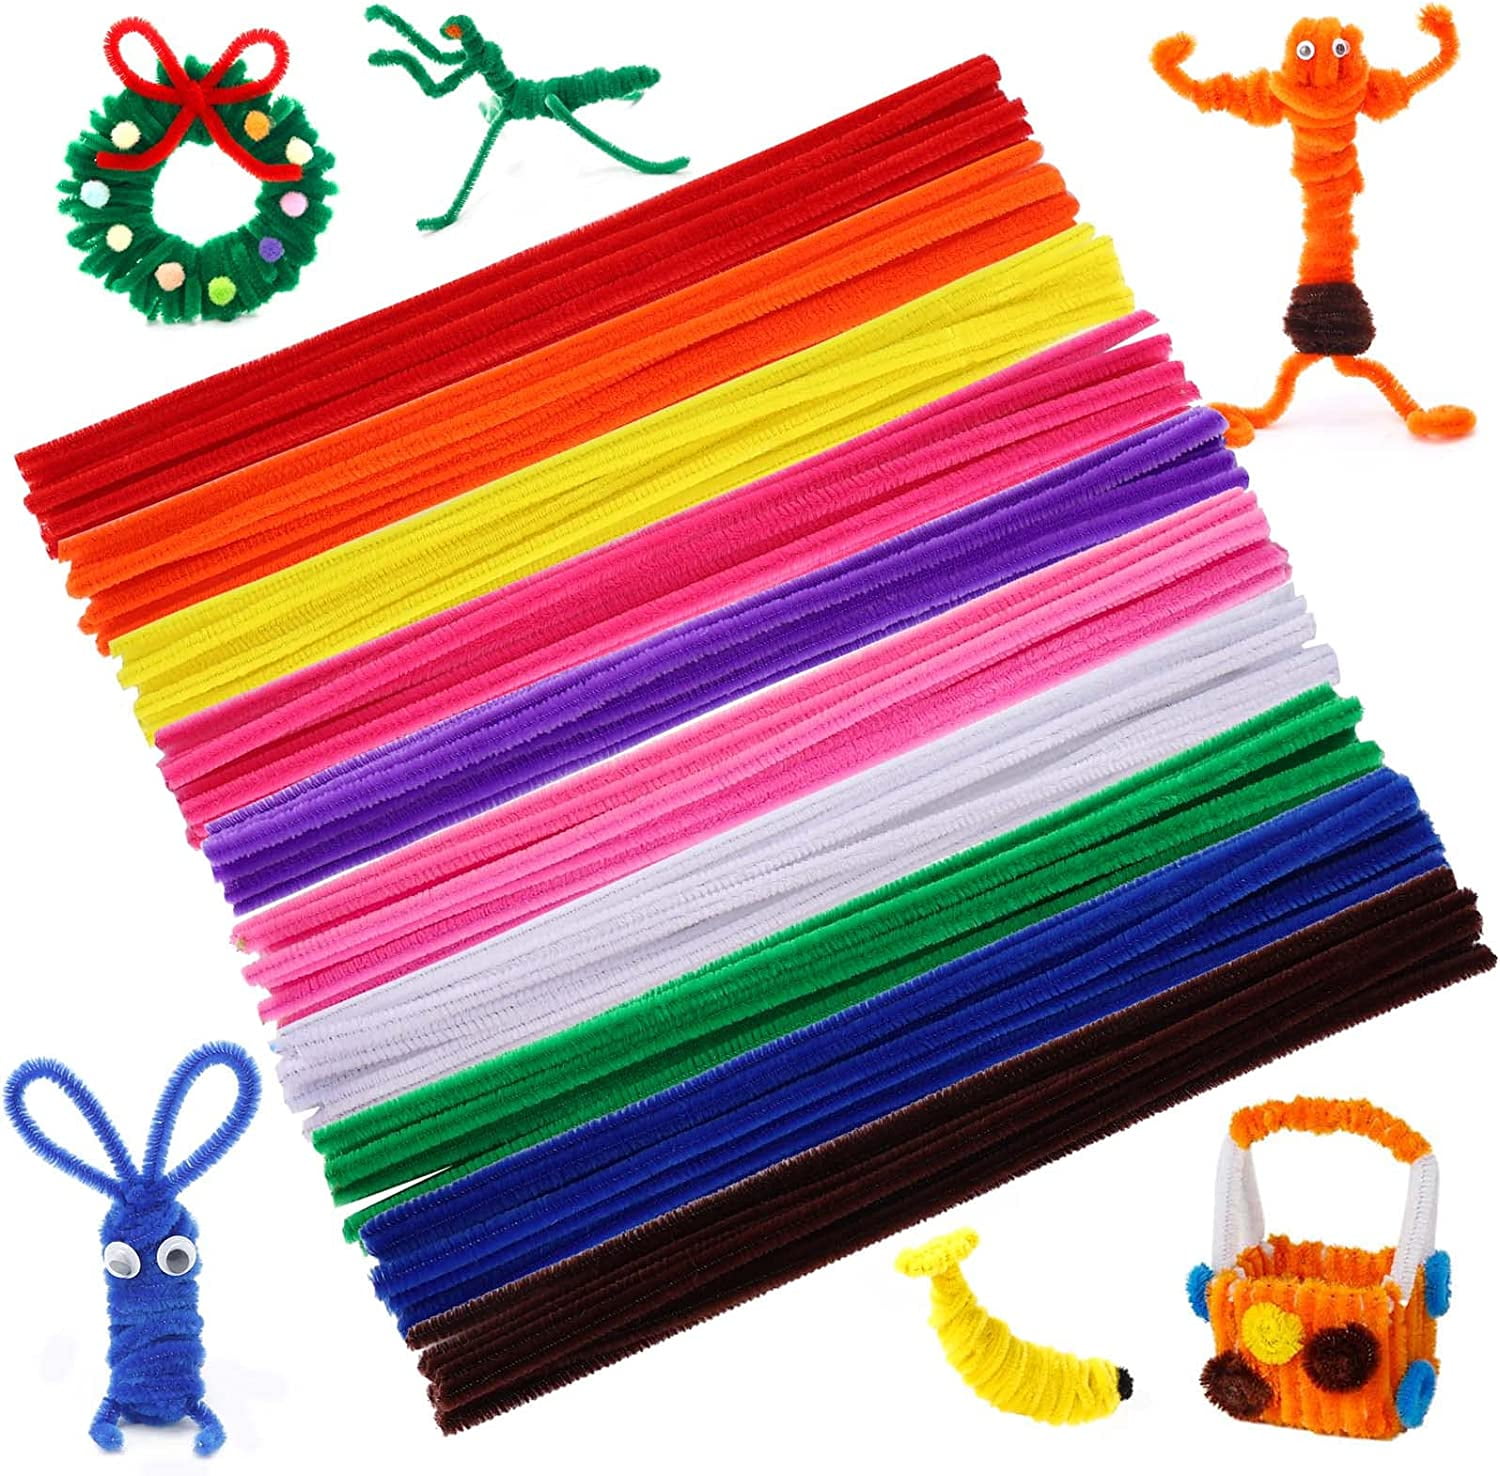 Casewin 100Pcs Pipe Cleaners Craft Set, Chenille Pipe Cleaners Craft  Supplies for DIY Crafts,Arts,Wedding,Home,  Party,Halloween,Christmas,Holiday